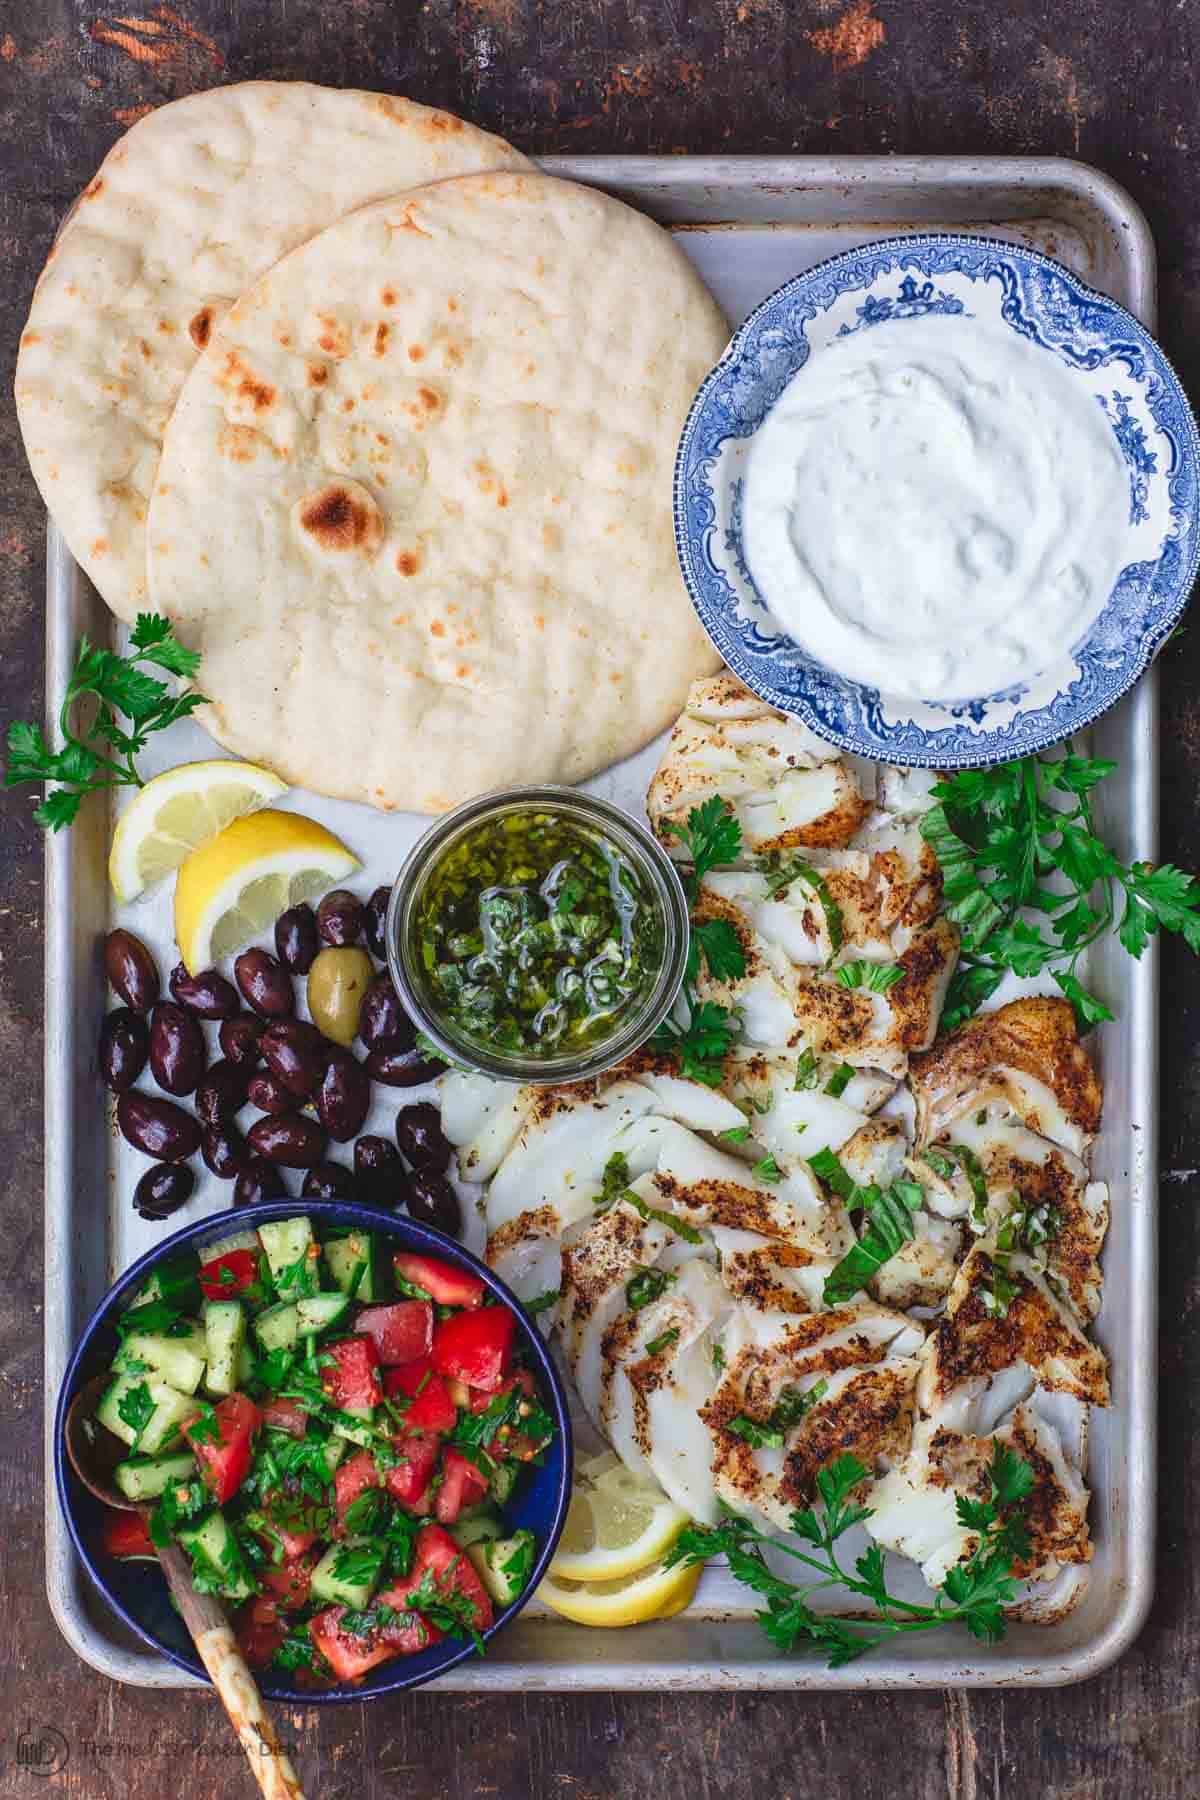 Mediterranean Pan Grilled Cod served on a tray with lemon basil sauce and gyro fixings like pita, salad, olives and Tzatziki